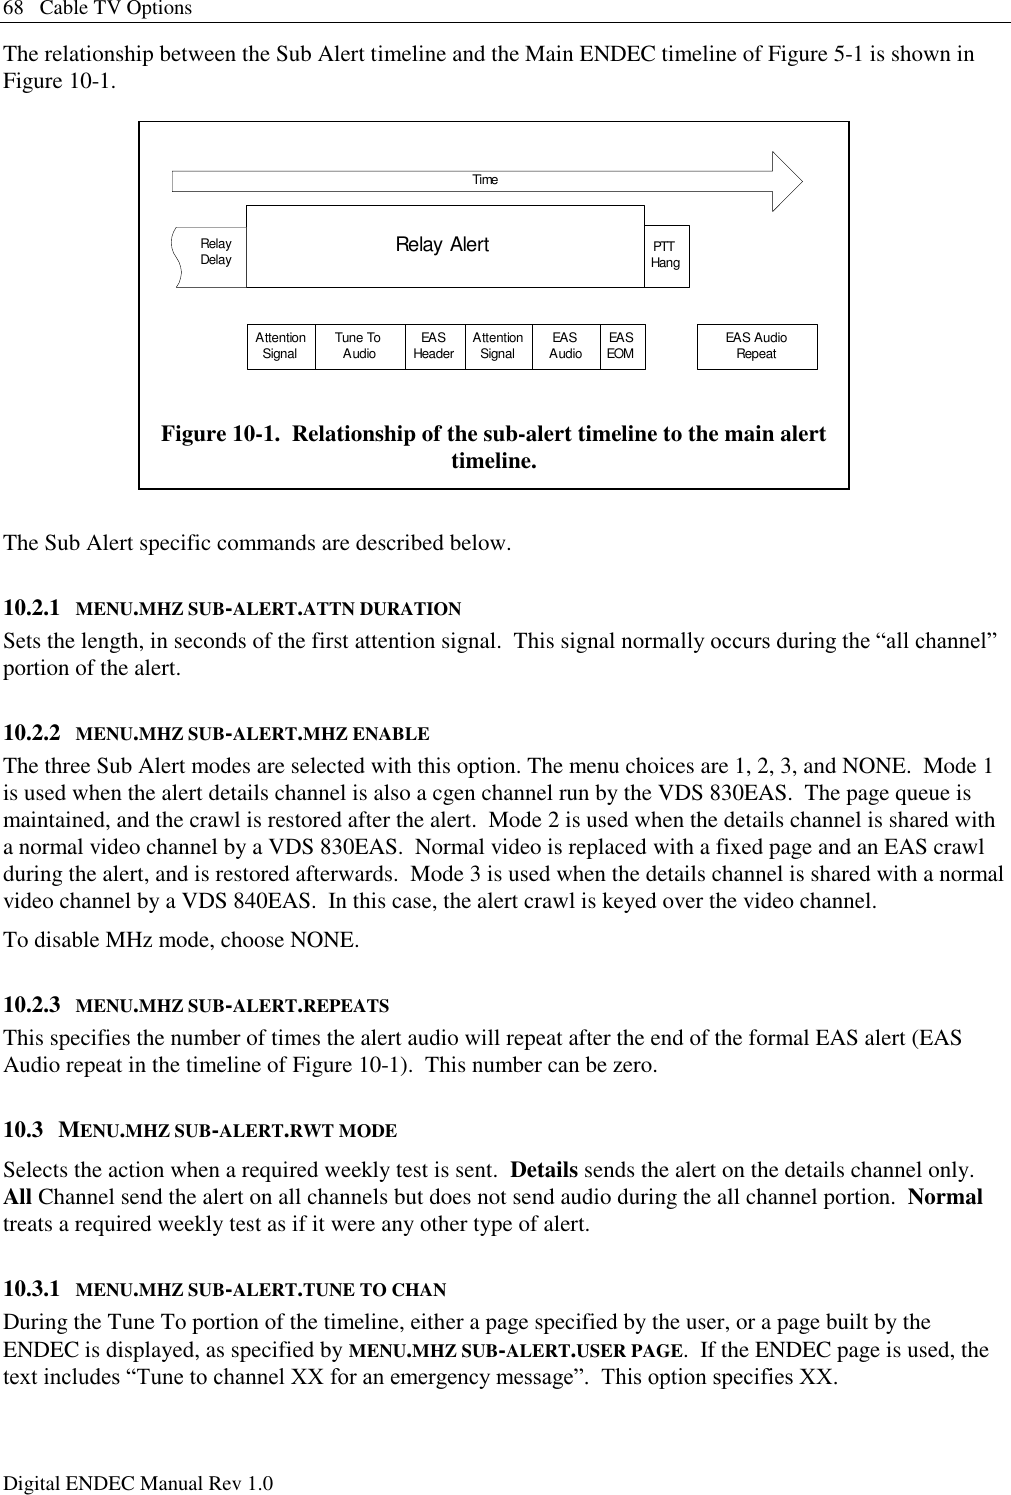 68   Cable TV Options Digital ENDEC Manual Rev 1.0 The relationship between the Sub Alert timeline and the Main ENDEC timeline of Figure 5-1 is shown in Figure 10-1.  The Sub Alert specific commands are described below. 10.2.1 MENU.MHZ SUB-ALERT.ATTN DURATION Sets the length, in seconds of the first attention signal.  This signal normally occurs during the “all channel” portion of the alert.  10.2.2 MENU.MHZ SUB-ALERT.MHZ ENABLE The three Sub Alert modes are selected with this option. The menu choices are 1, 2, 3, and NONE.  Mode 1 is used when the alert details channel is also a cgen channel run by the VDS 830EAS.  The page queue is maintained, and the crawl is restored after the alert.  Mode 2 is used when the details channel is shared with a normal video channel by a VDS 830EAS.  Normal video is replaced with a fixed page and an EAS crawl during the alert, and is restored afterwards.  Mode 3 is used when the details channel is shared with a normal video channel by a VDS 840EAS.  In this case, the alert crawl is keyed over the video channel. To disable MHz mode, choose NONE. 10.2.3 MENU.MHZ SUB-ALERT.REPEATS This specifies the number of times the alert audio will repeat after the end of the formal EAS alert (EAS Audio repeat in the timeline of Figure 10-1).  This number can be zero. 10.3 MENU.MHZ SUB-ALERT.RWT MODE Selects the action when a required weekly test is sent.  Details sends the alert on the details channel only.  All Channel send the alert on all channels but does not send audio during the all channel portion.  Normal treats a required weekly test as if it were any other type of alert. 10.3.1 MENU.MHZ SUB-ALERT.TUNE TO CHAN During the Tune To portion of the timeline, either a page specified by the user, or a page built by the ENDEC is displayed, as specified by MENU.MHZ SUB-ALERT.USER PAGE.  If the ENDEC page is used, the text includes “Tune to channel XX for an emergency message”.  This option specifies XX. Relay Alert PTTHangTimeTune ToAudio EASHeader AttentionSignalAttentionSignal EASAudio EASEOM EAS AudioRepeatRelayDelay Figure 10-1.  Relationship of the sub-alert timeline to the main alert timeline. 